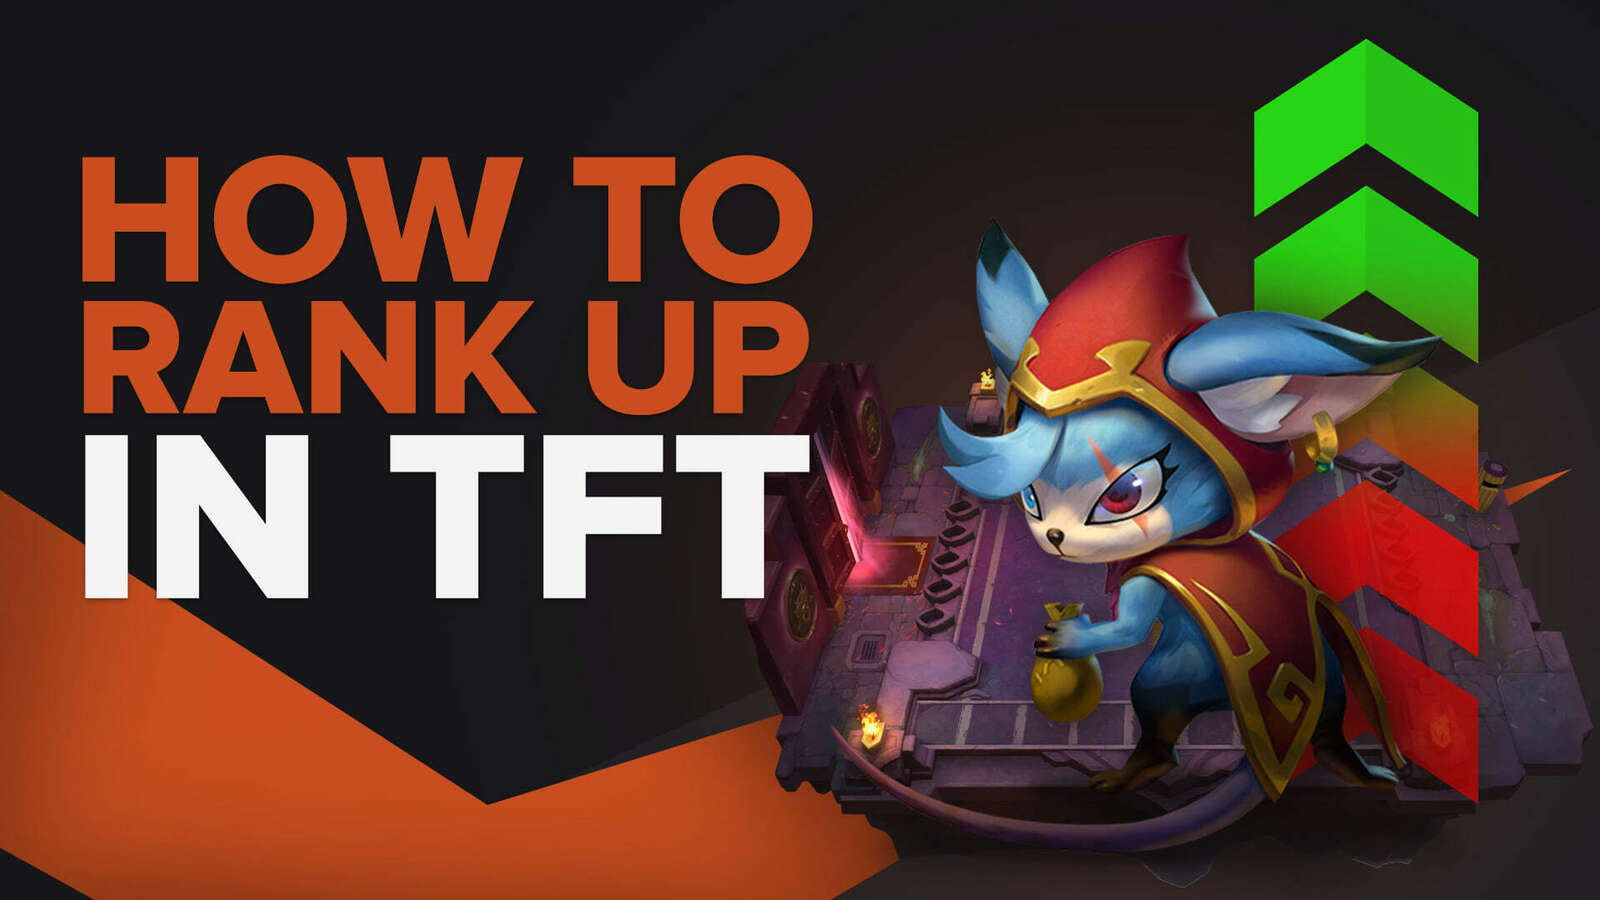 How To Rank Up In TFT | The Complete Guide